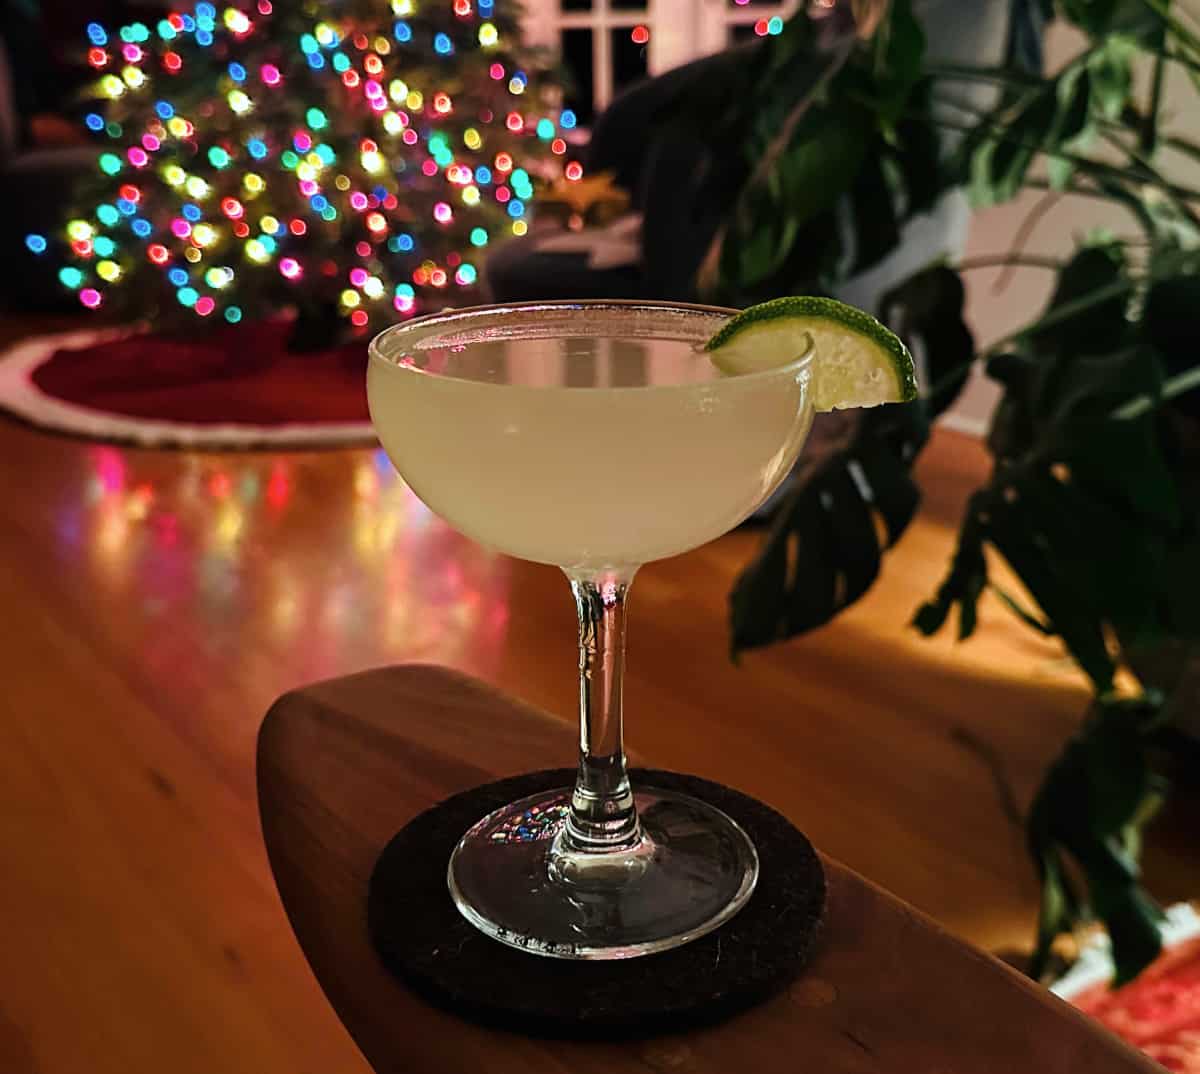 Ginger martini garnished with a lime wedge and sitting on a wooden arm rest in front of a Christmas tree.